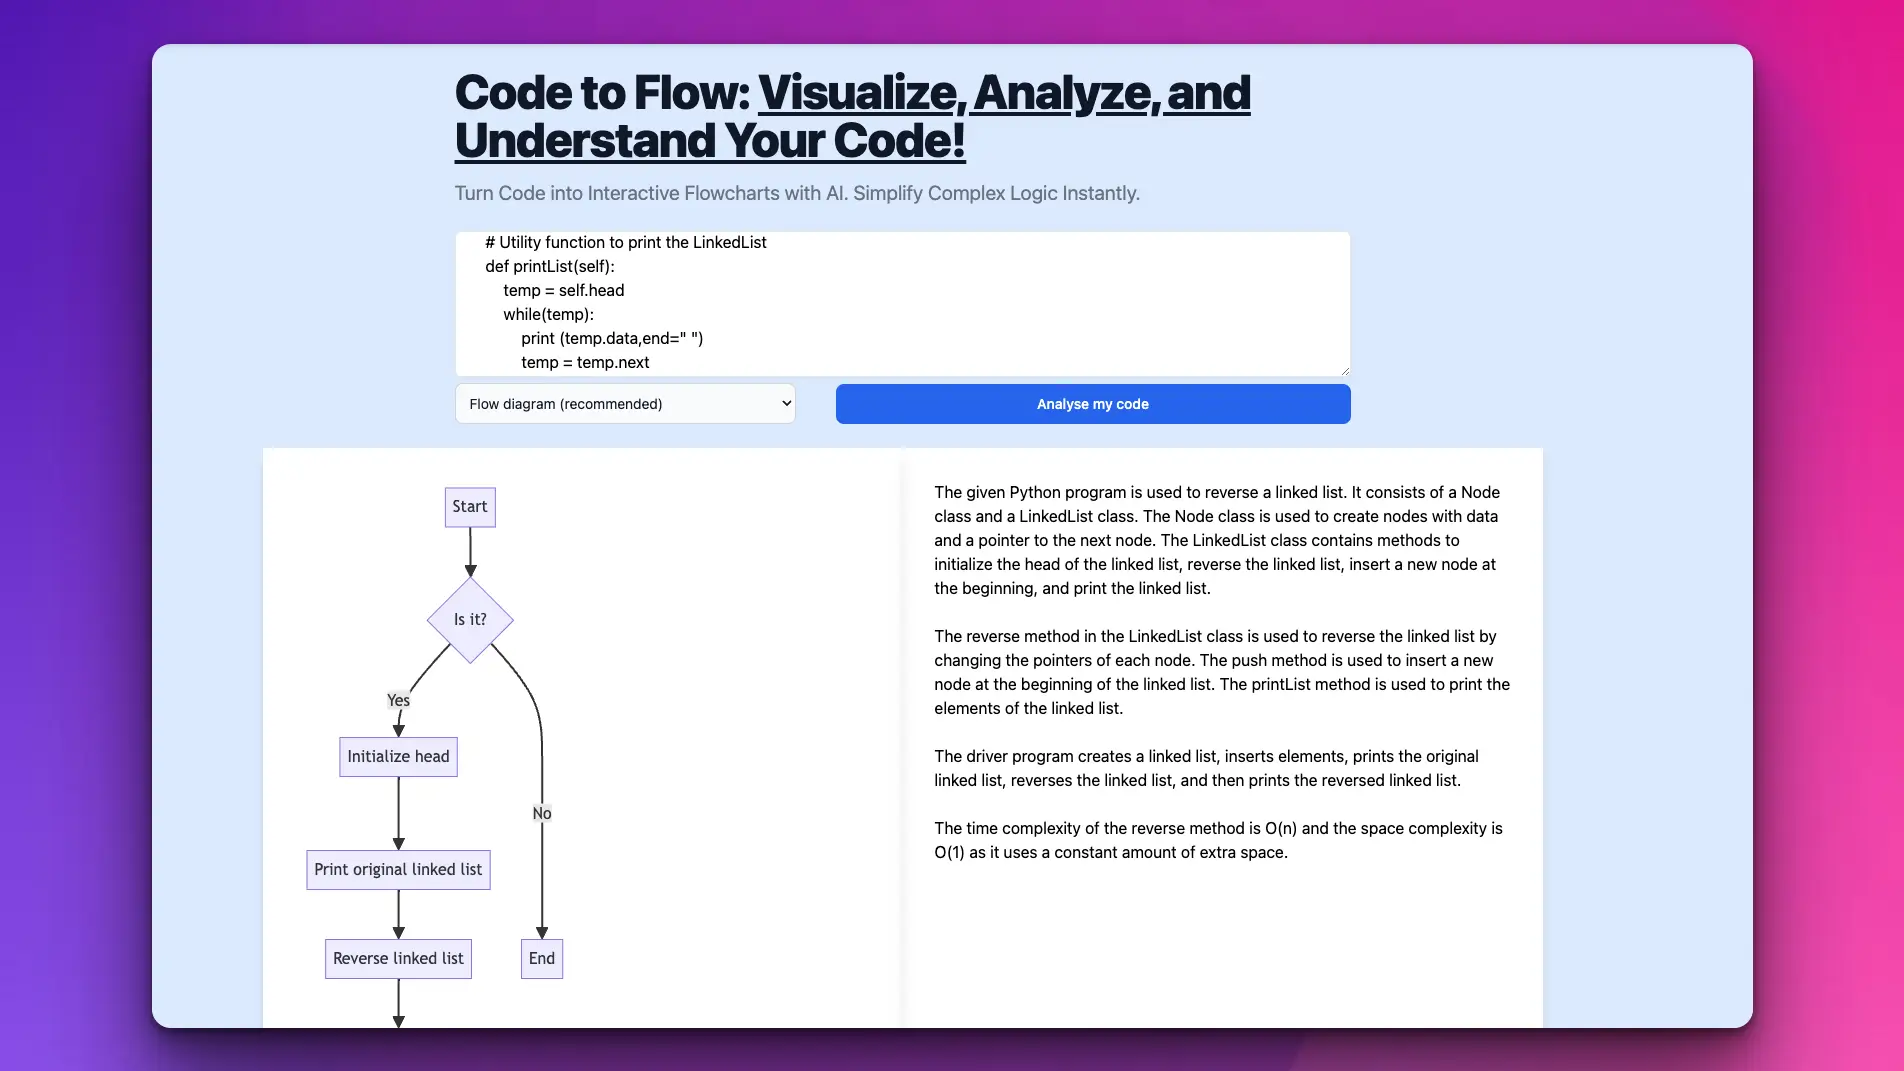 Visualize, Analyze, and Understand Your Code flow.